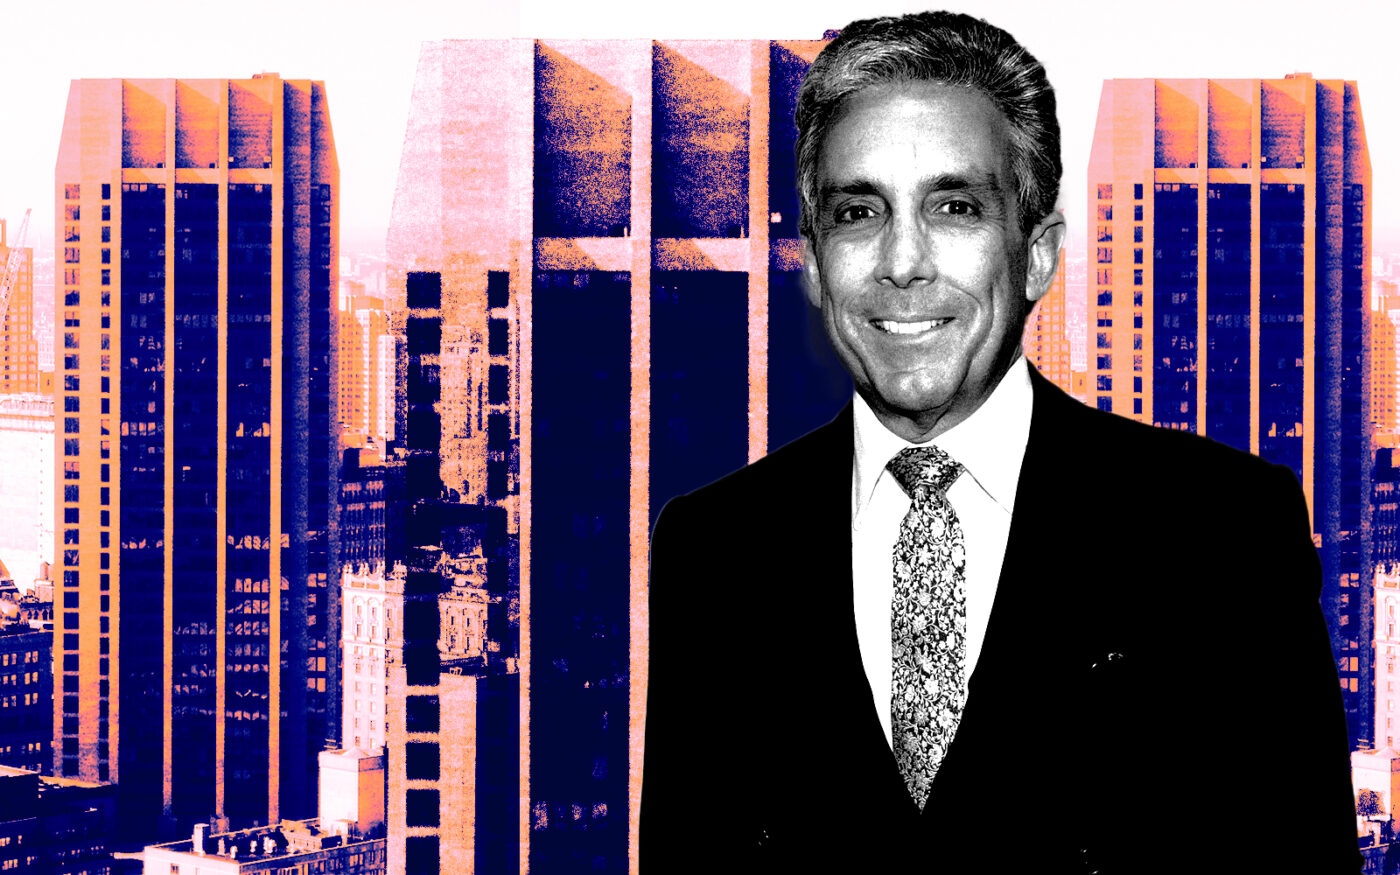 Charles Cohen’s 3 Park Ave as Risk of Downgrade